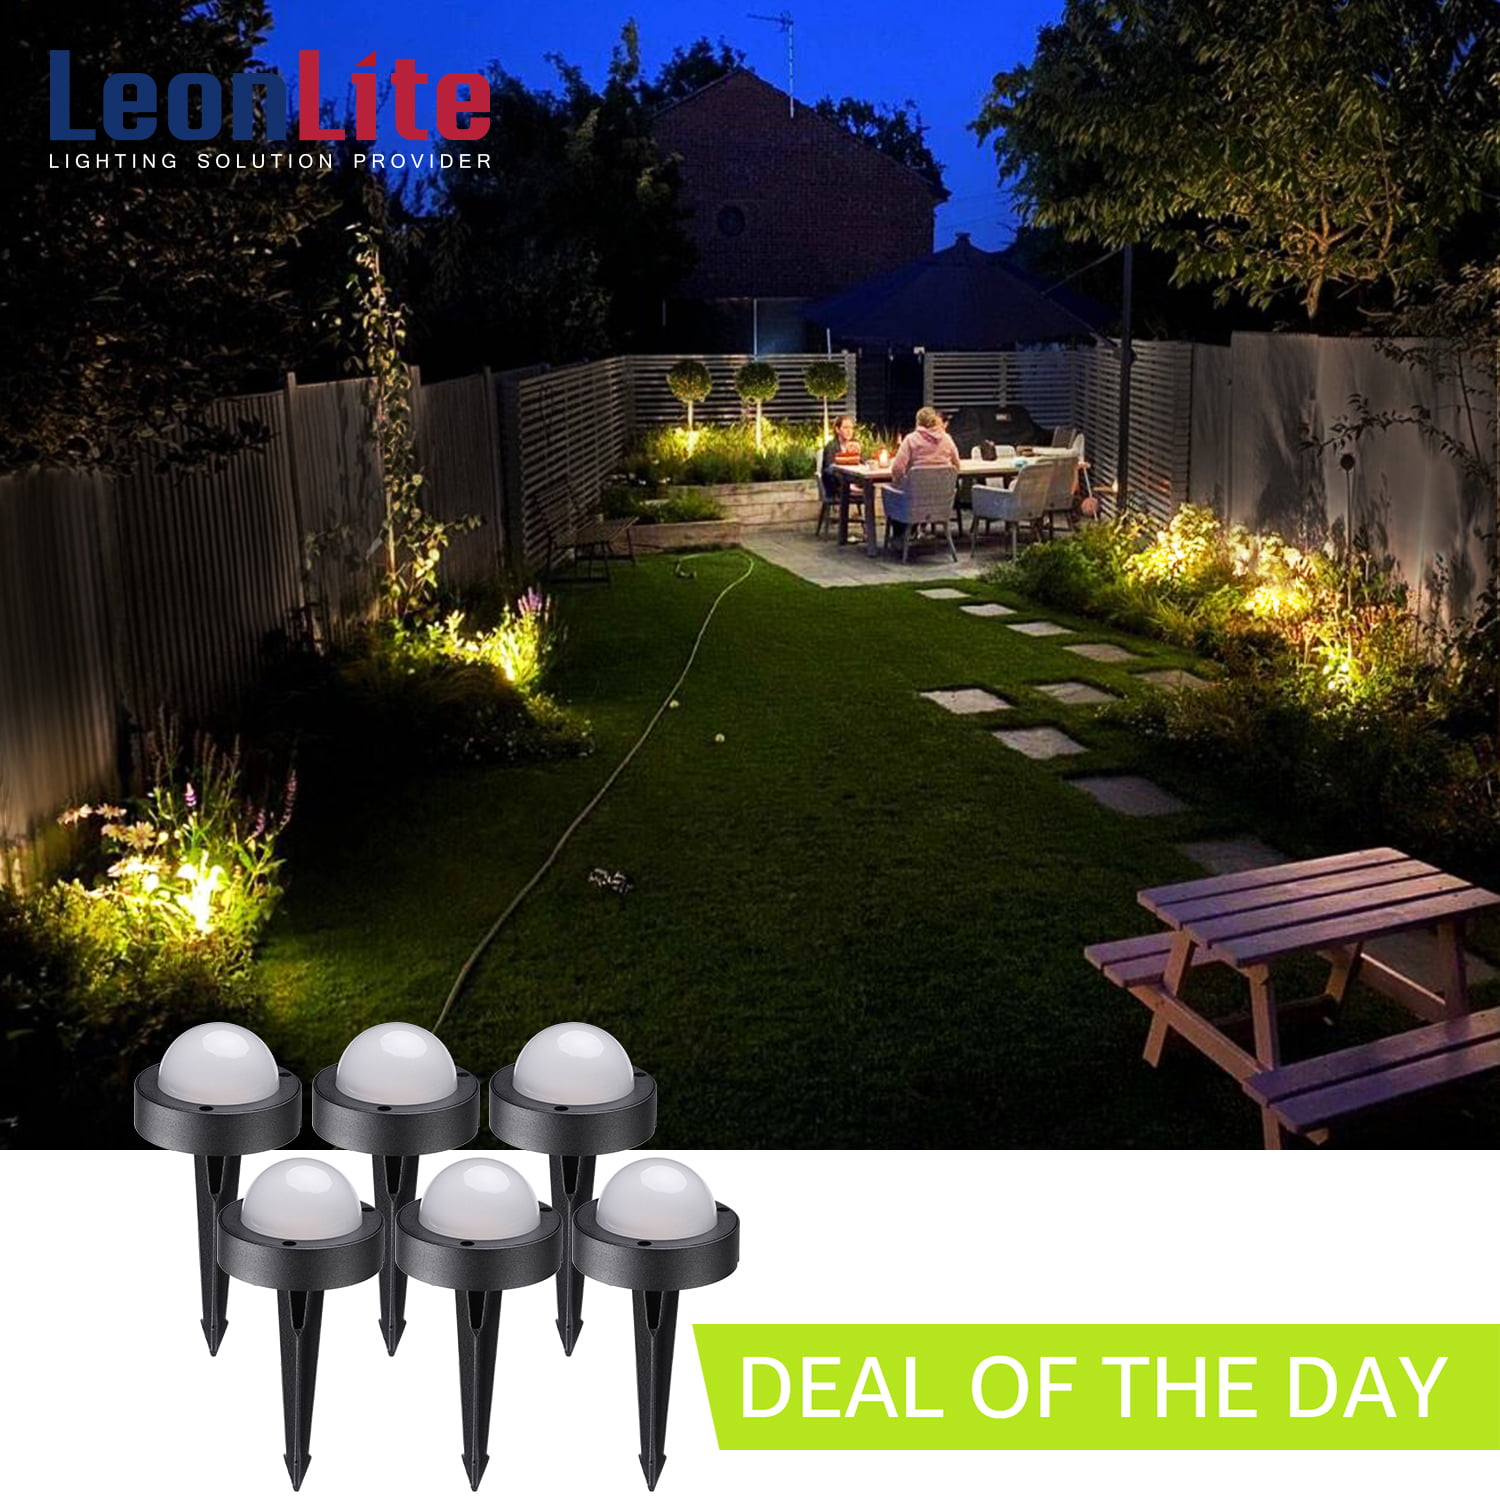 3000K Warm White LEONLITE 3W LED Landscape Light 18W Eqv Waterproof Pack of 8 12V Low Voltage ETL Listed Outdoor Pathway Garden Yard Patio Lamp Aluminum Housing with Ground Stake 